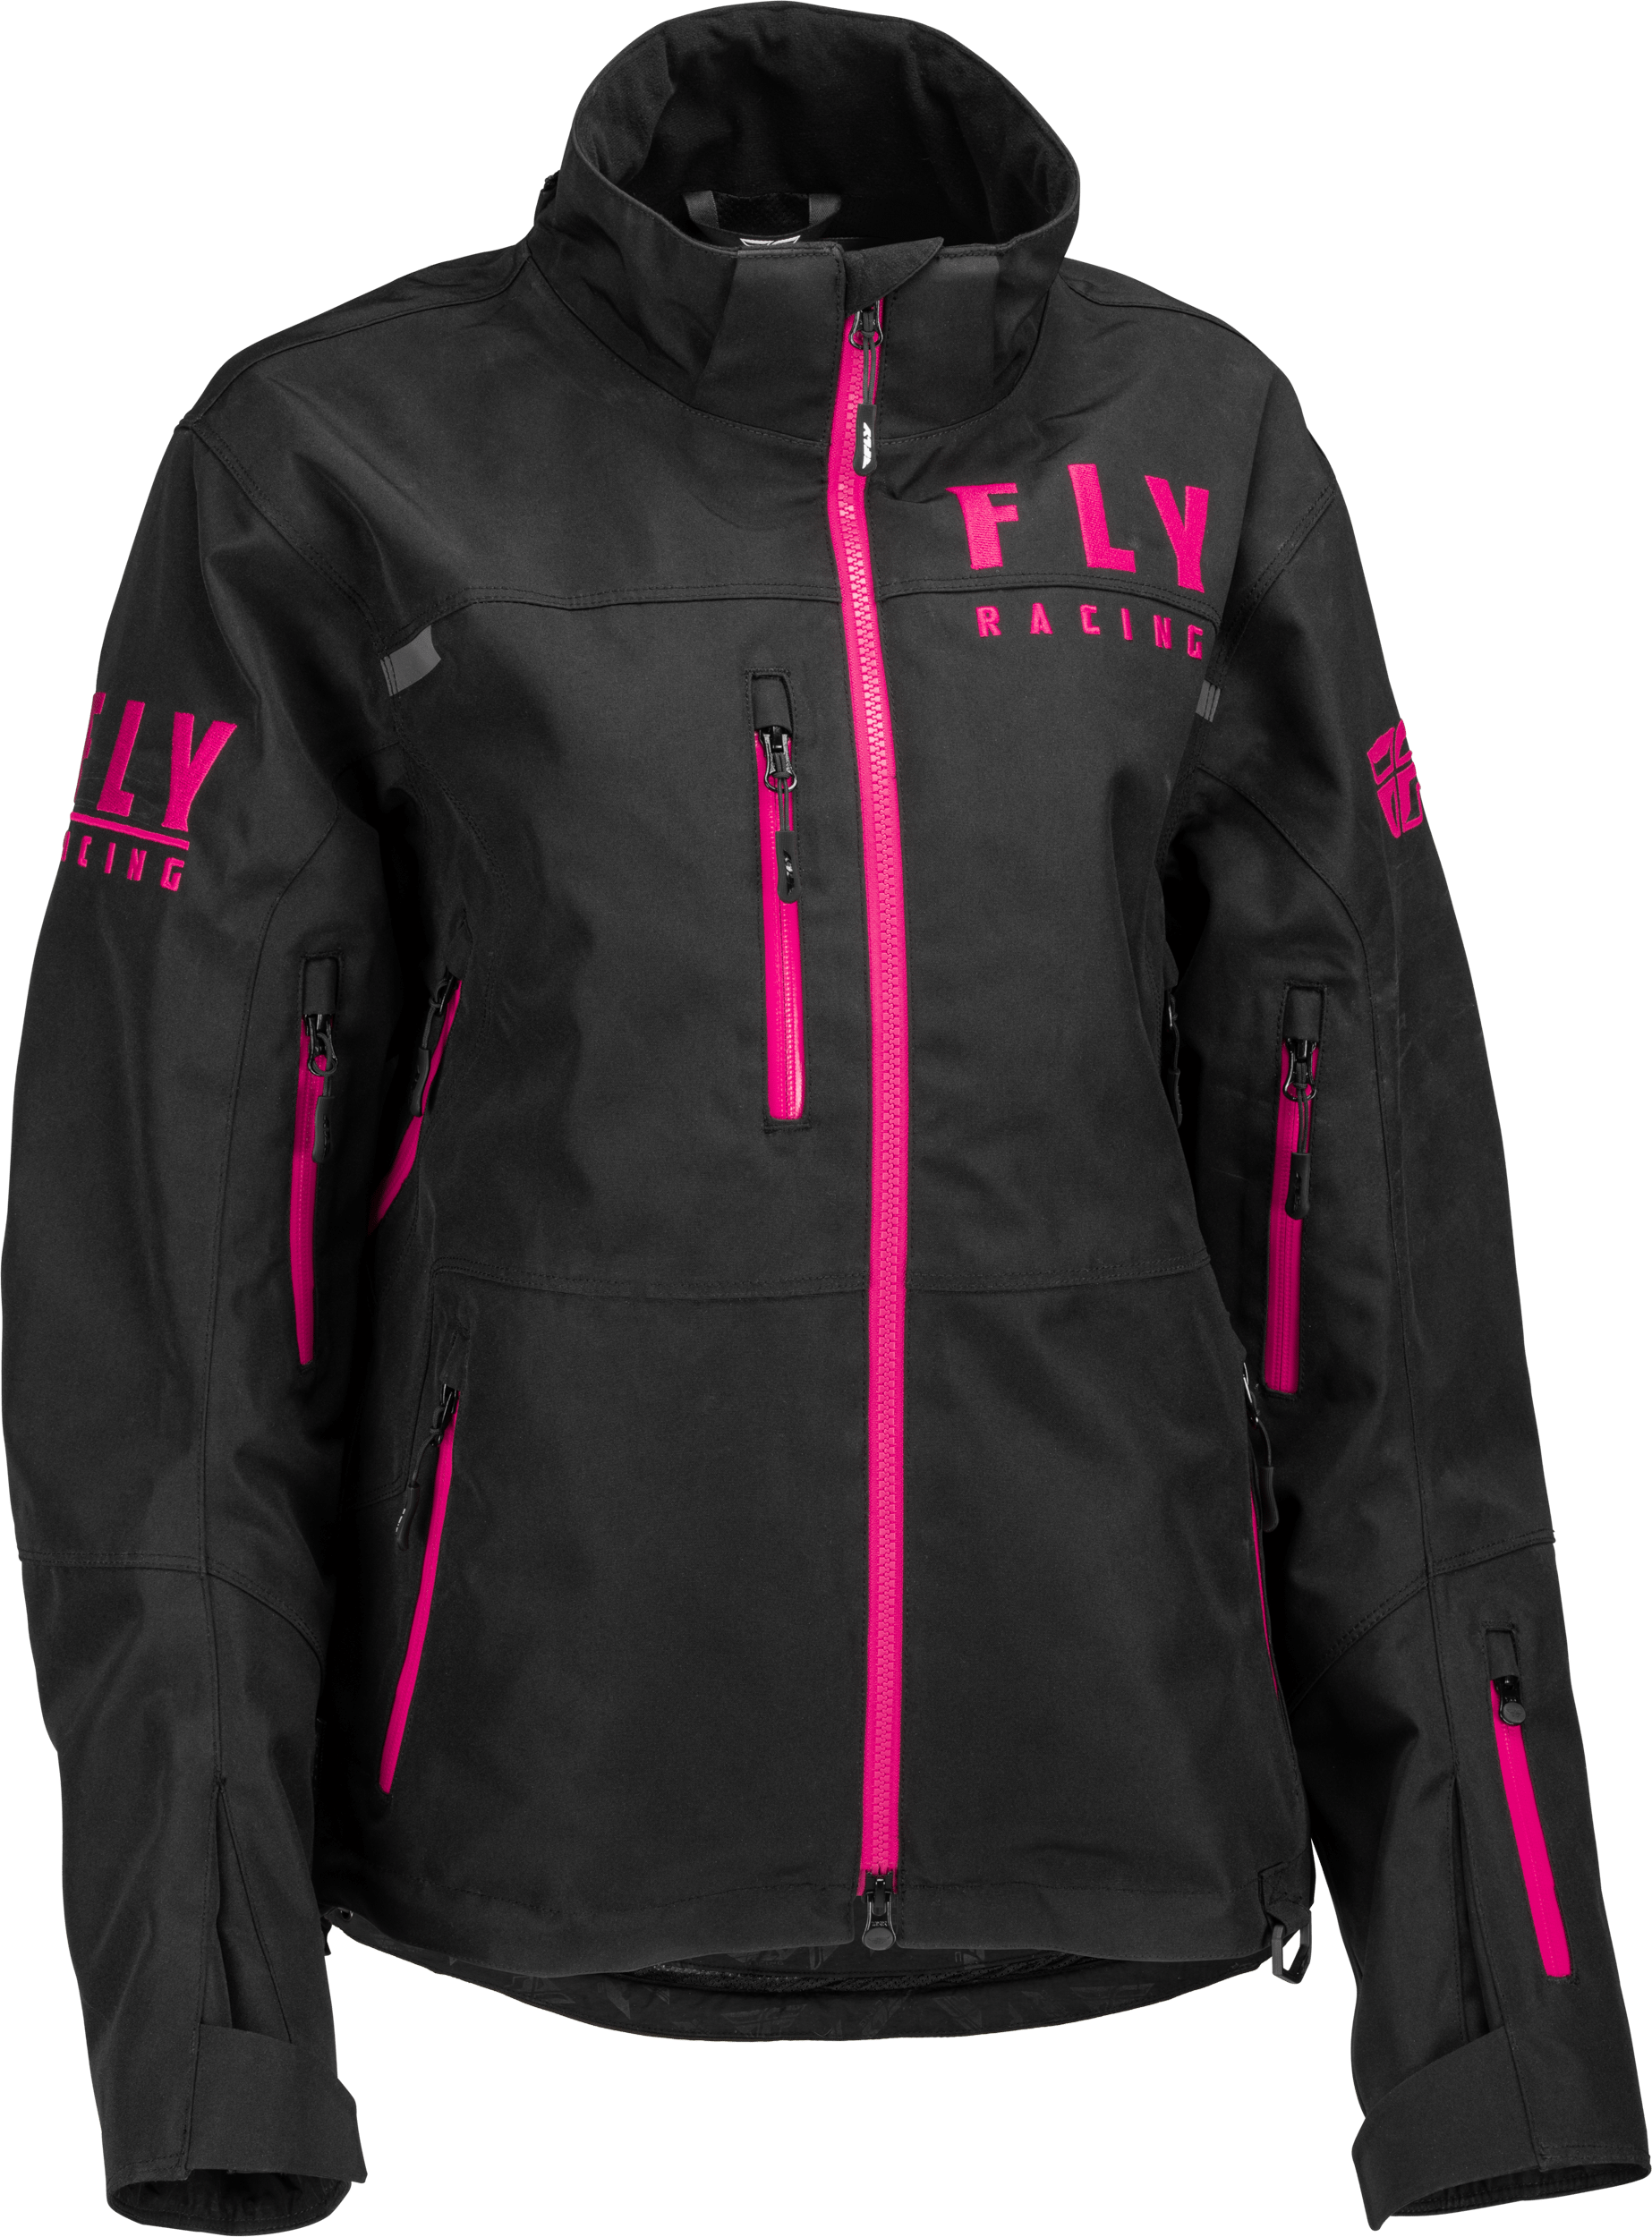 Western Powersports Jacket Women's Carbon Jacket By Fly Racing